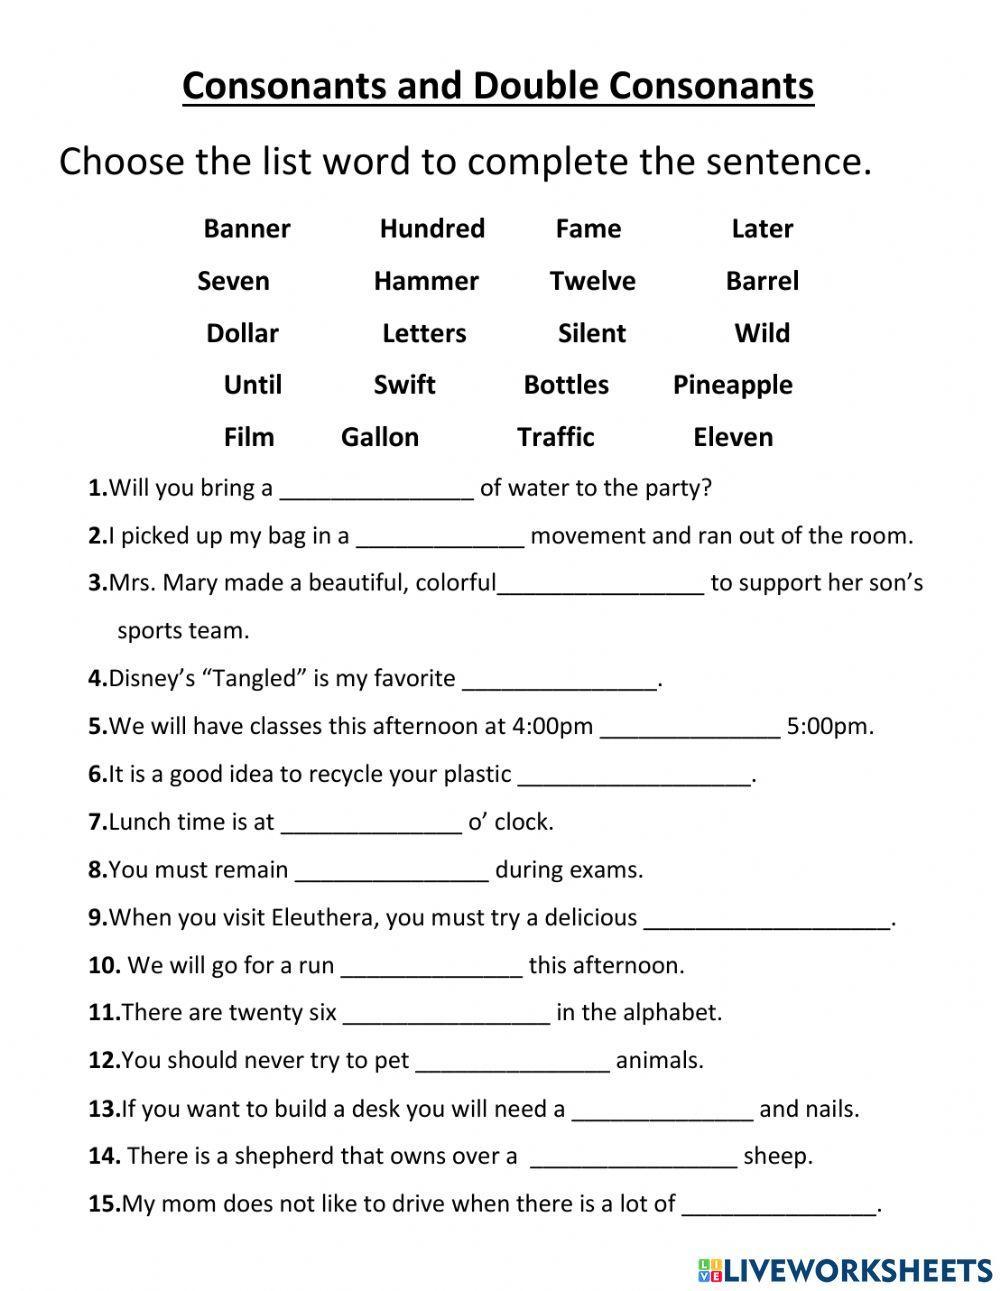 Consonants and Double Consonants - Fill in The Words